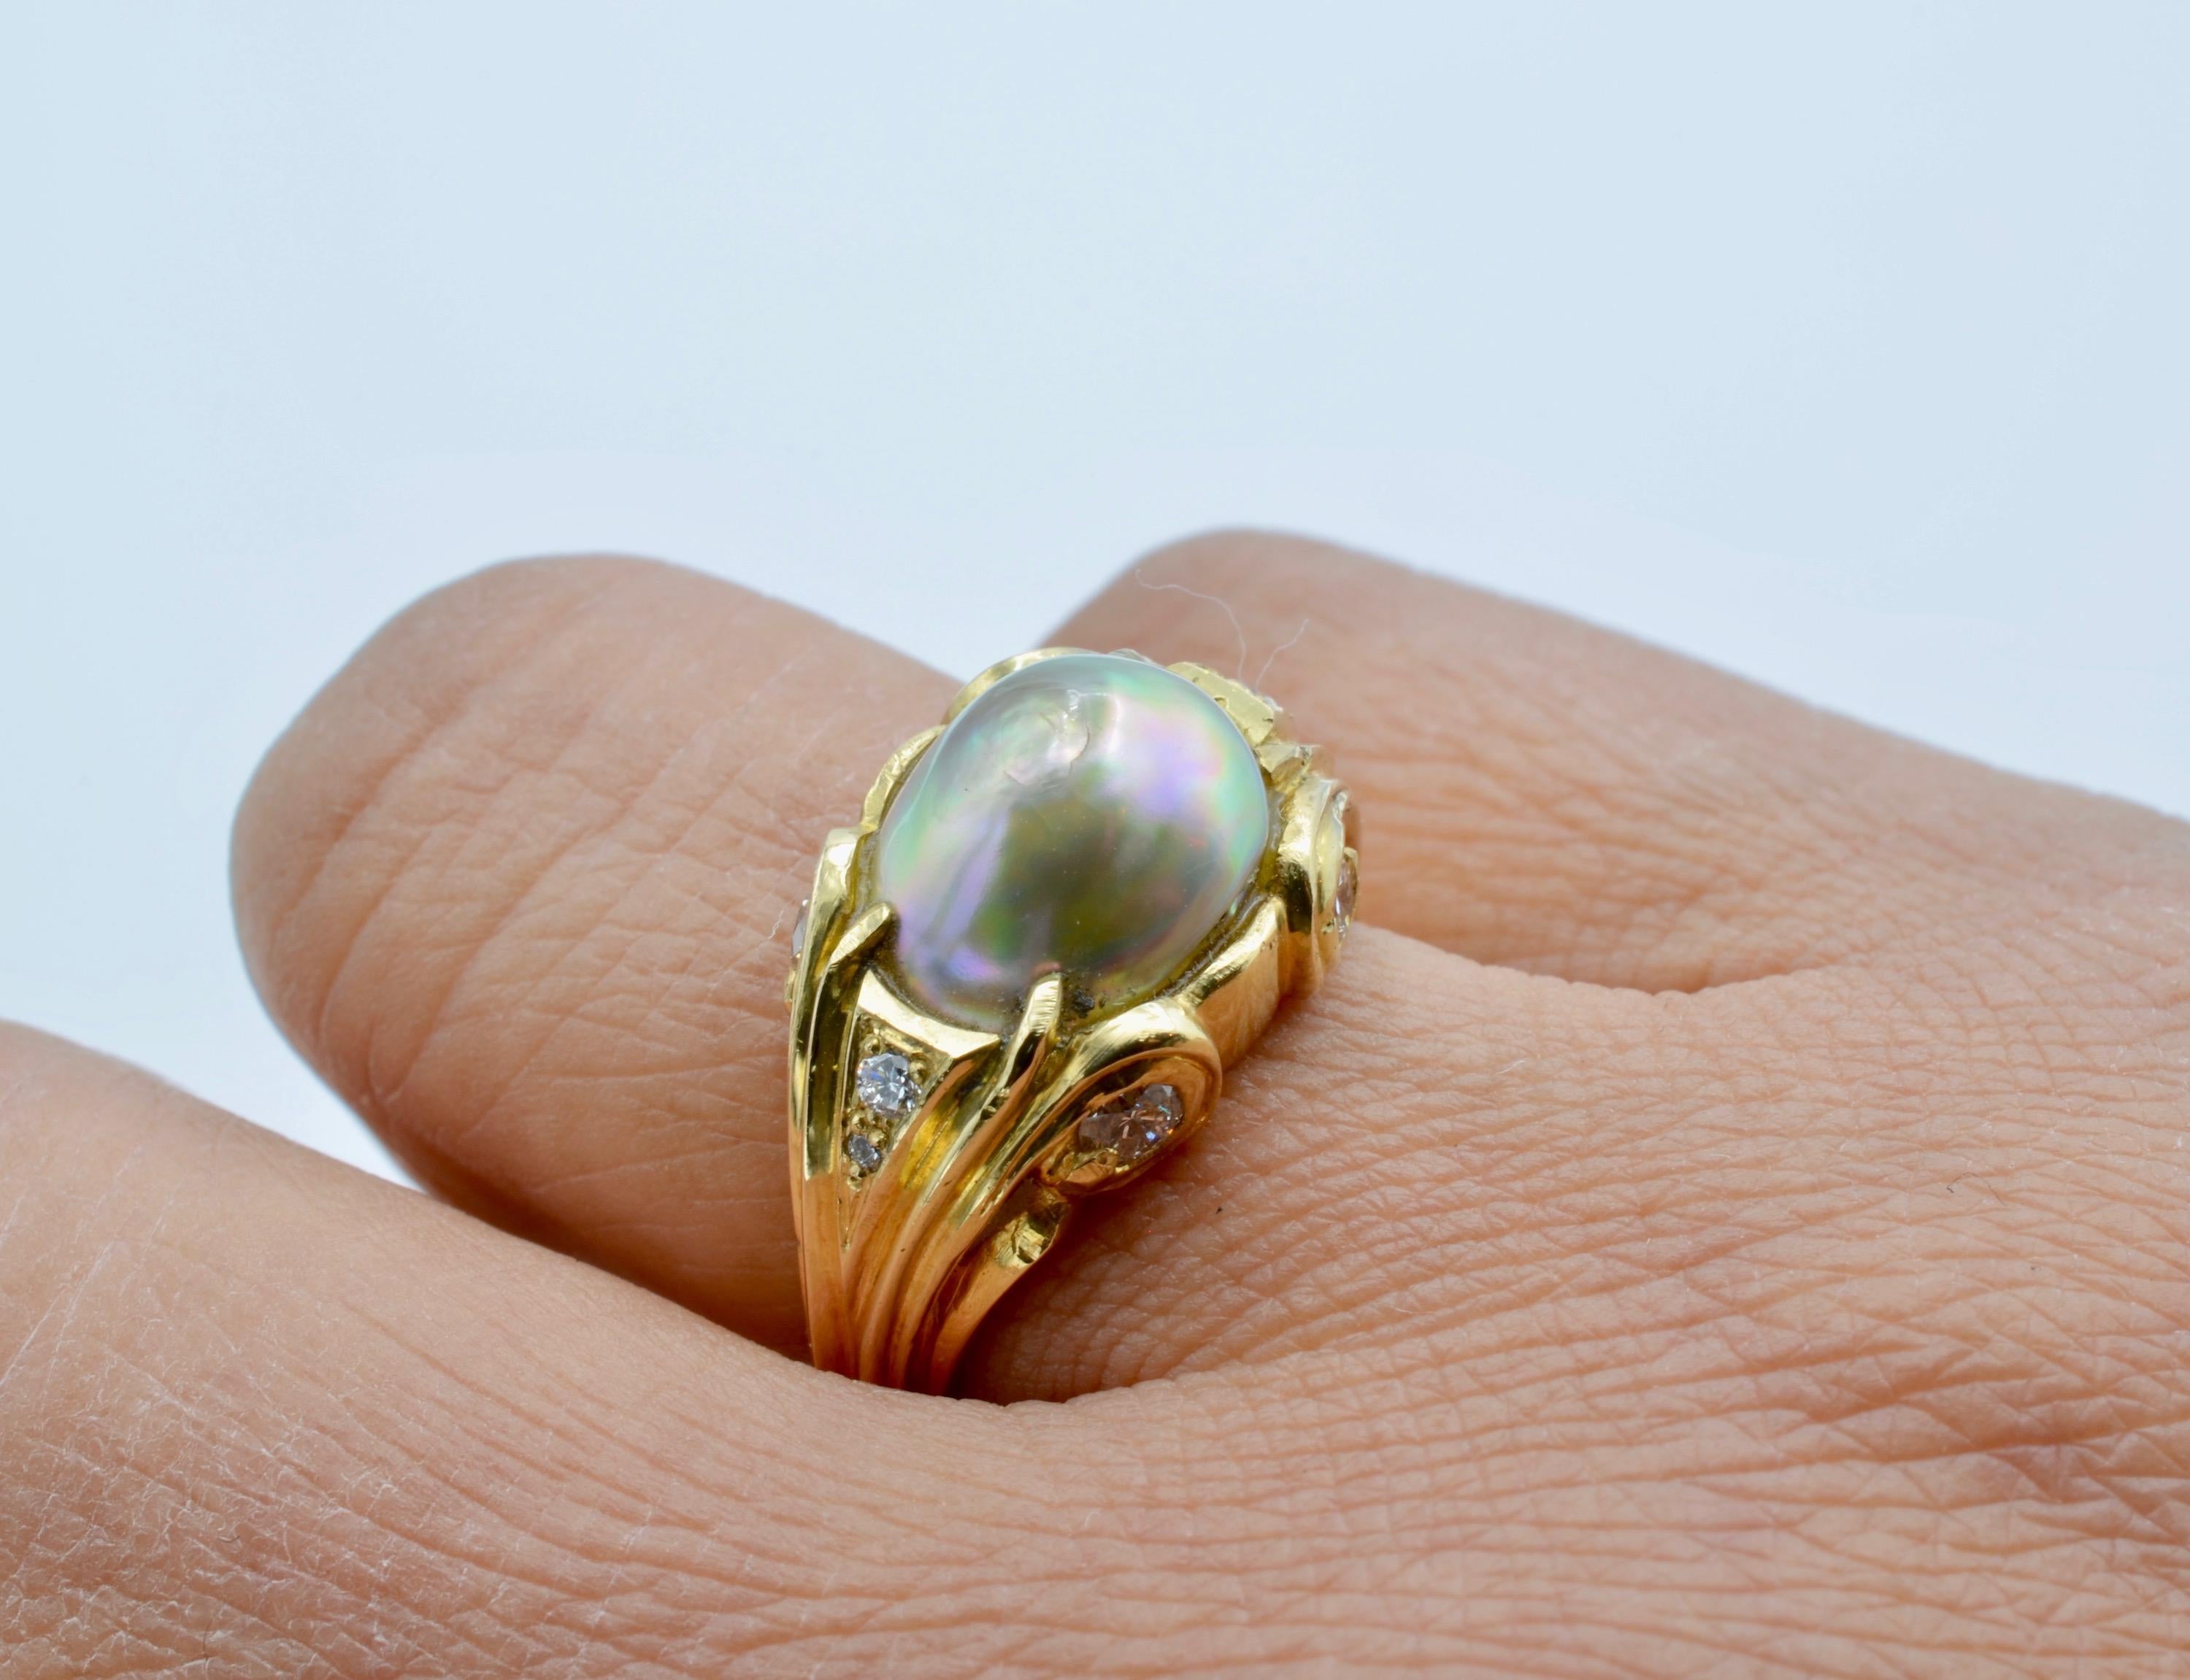 The design of this lovely ring is reminiscent of classic architecture. Greek or Roman columns come to mind and inspire fantasies of gods and goddesses. The diamond weight is 0.45ct  aprox.  F-G VS2-SI1 clarity. The center natural abalone pearl has